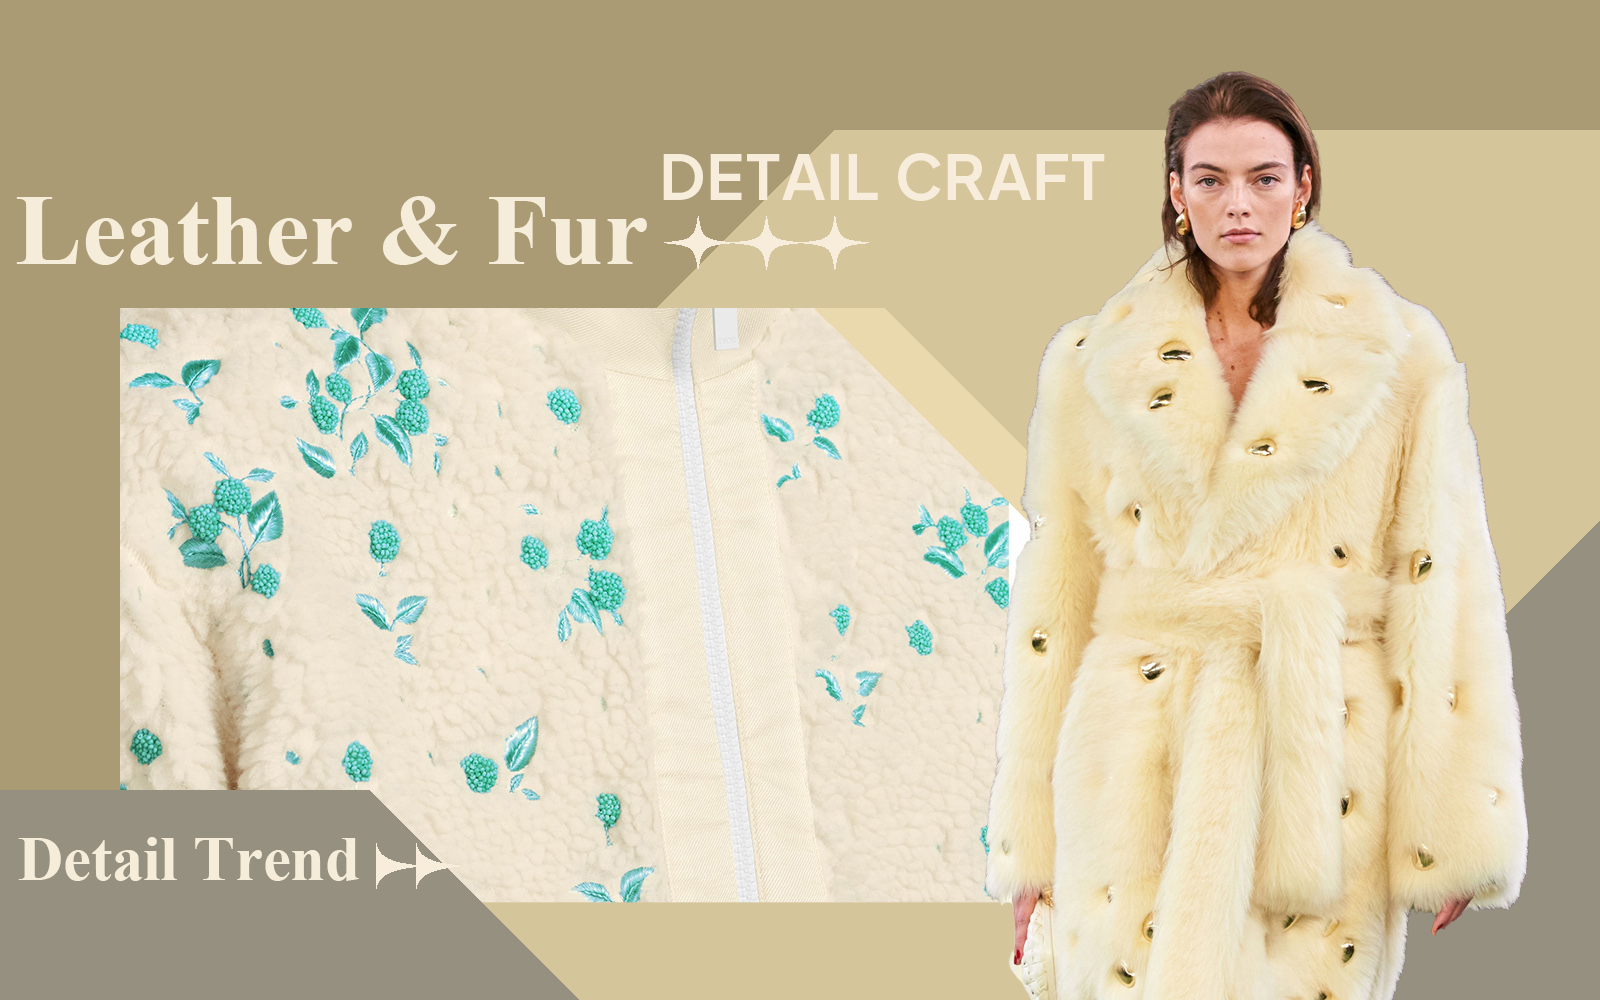 The Detail & Craft Trend for Women's Leather & Fur